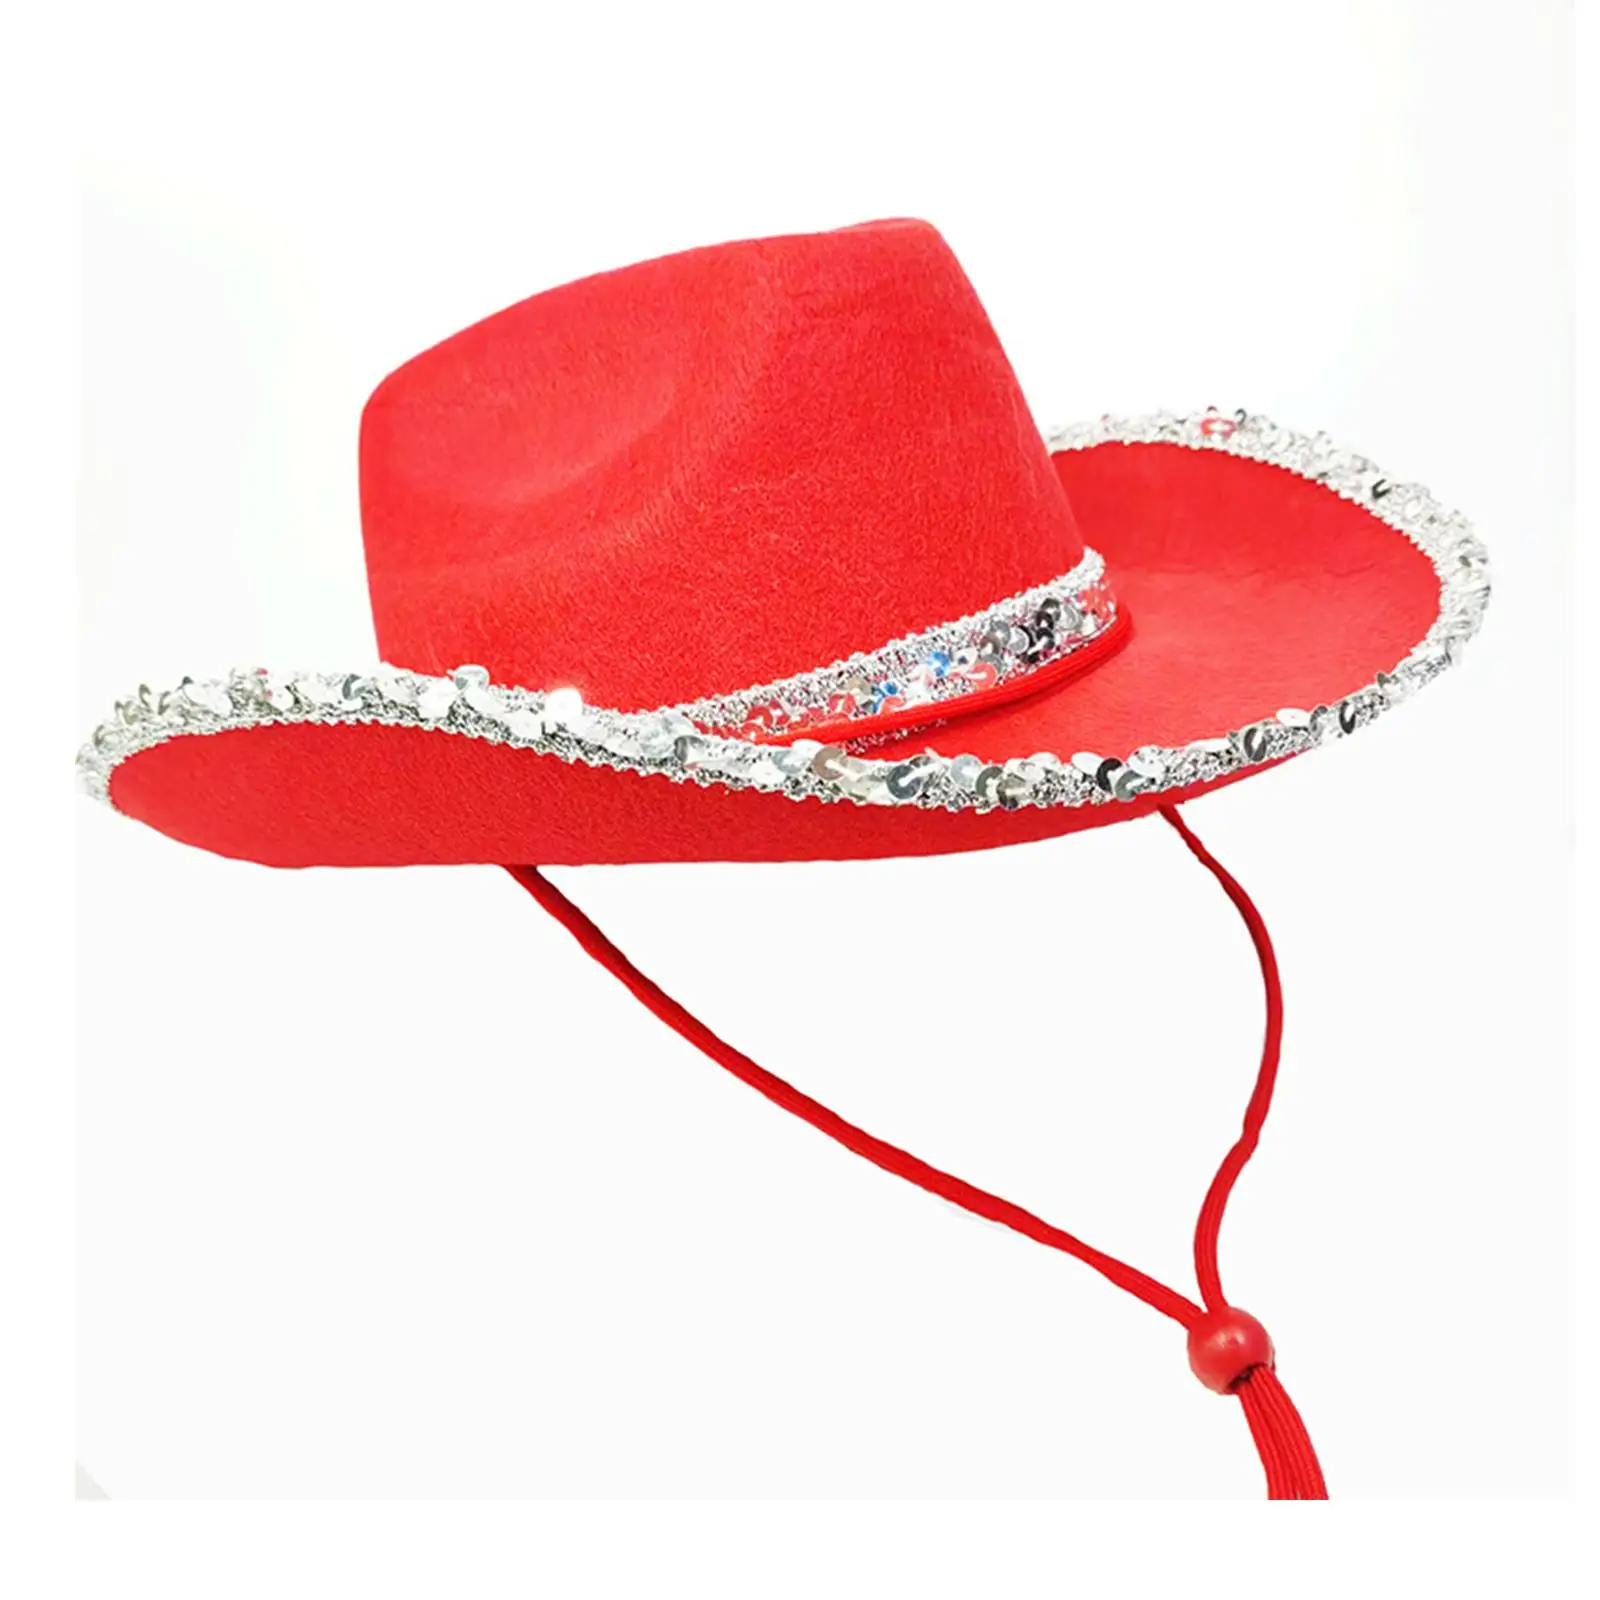 Western Style Cowboy Hat Party Hats Sun Hat for Festival Music Concerts